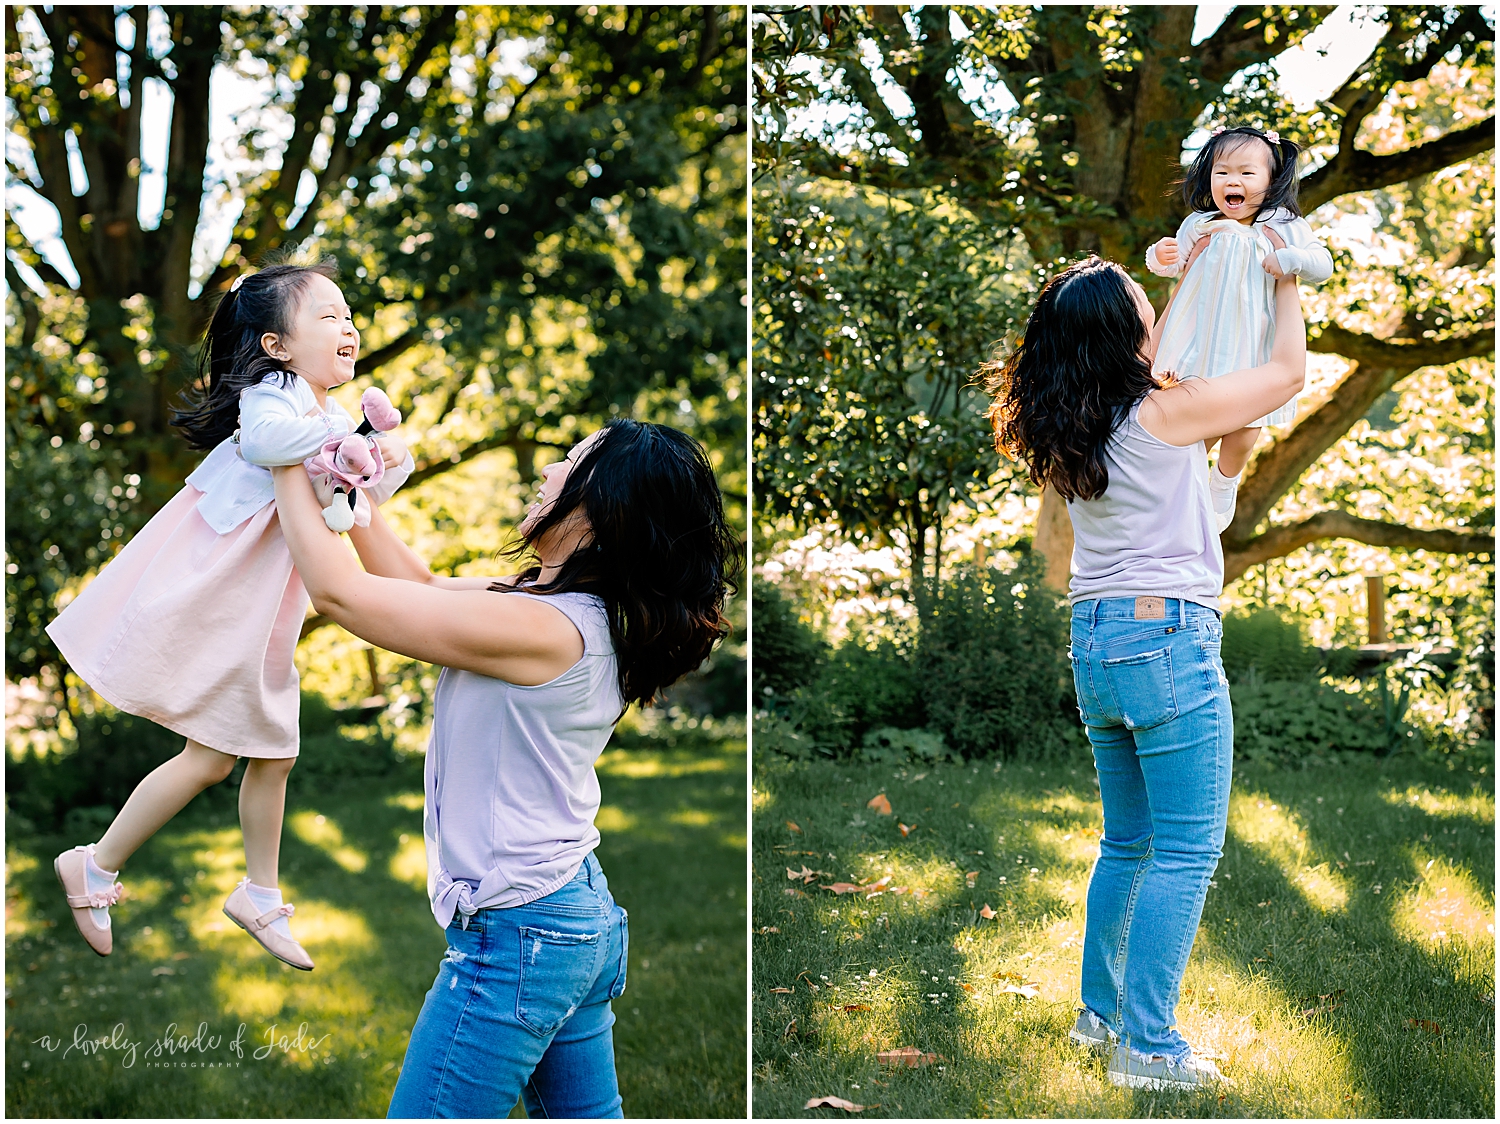 Fun_Extended_Family_Session_Morristown_NJ_Photography_0000.jpg